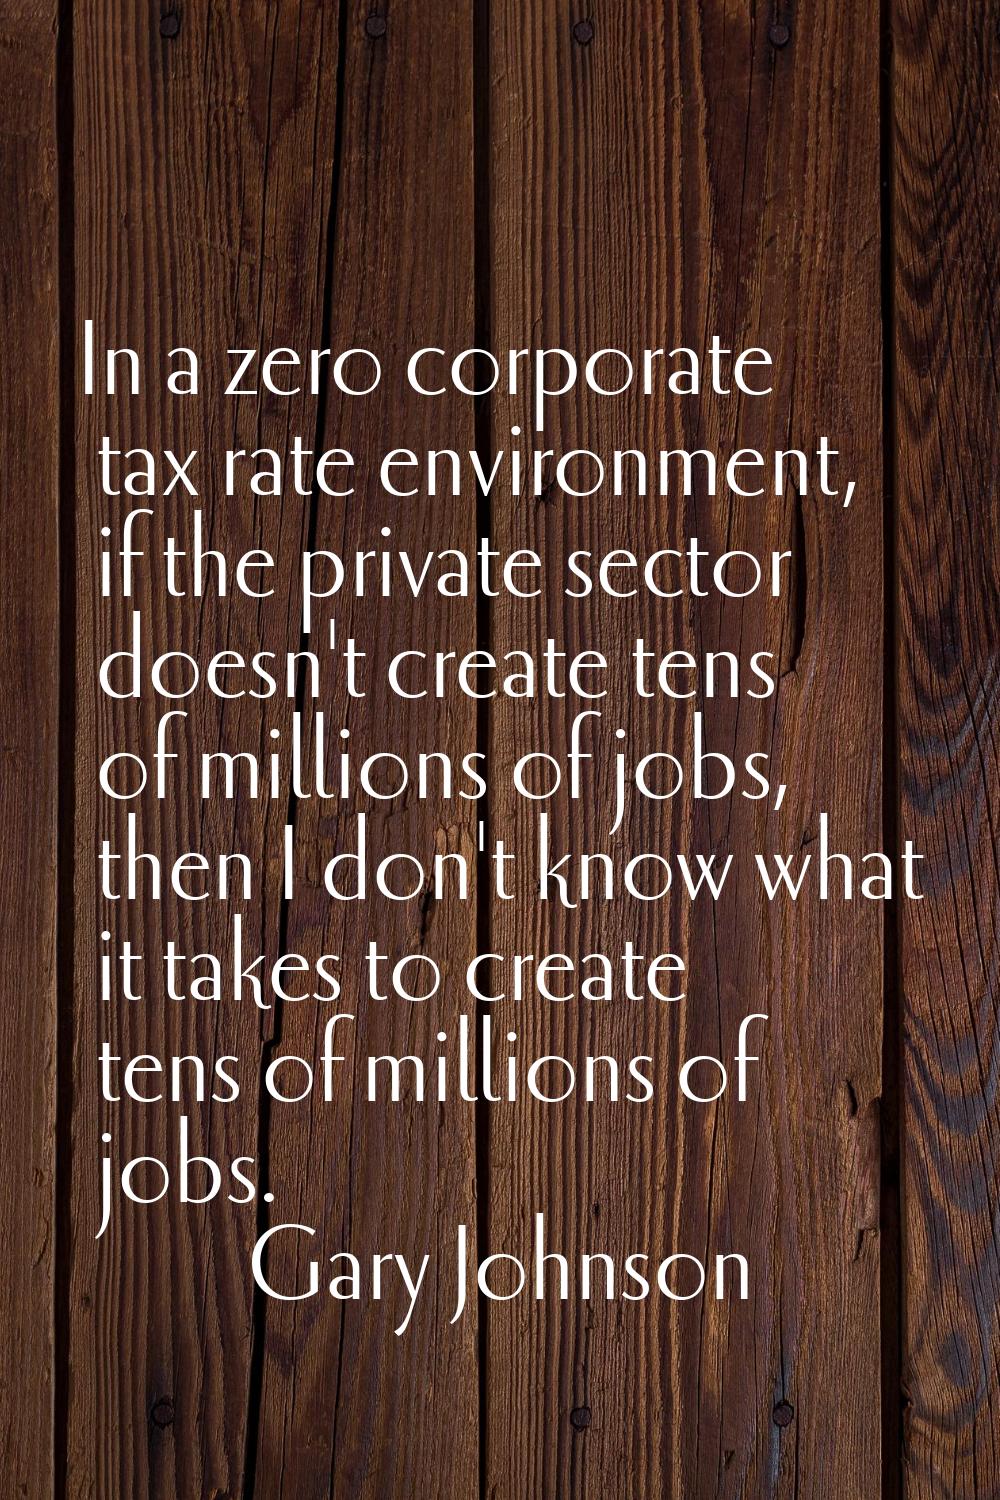 In a zero corporate tax rate environment, if the private sector doesn't create tens of millions of 